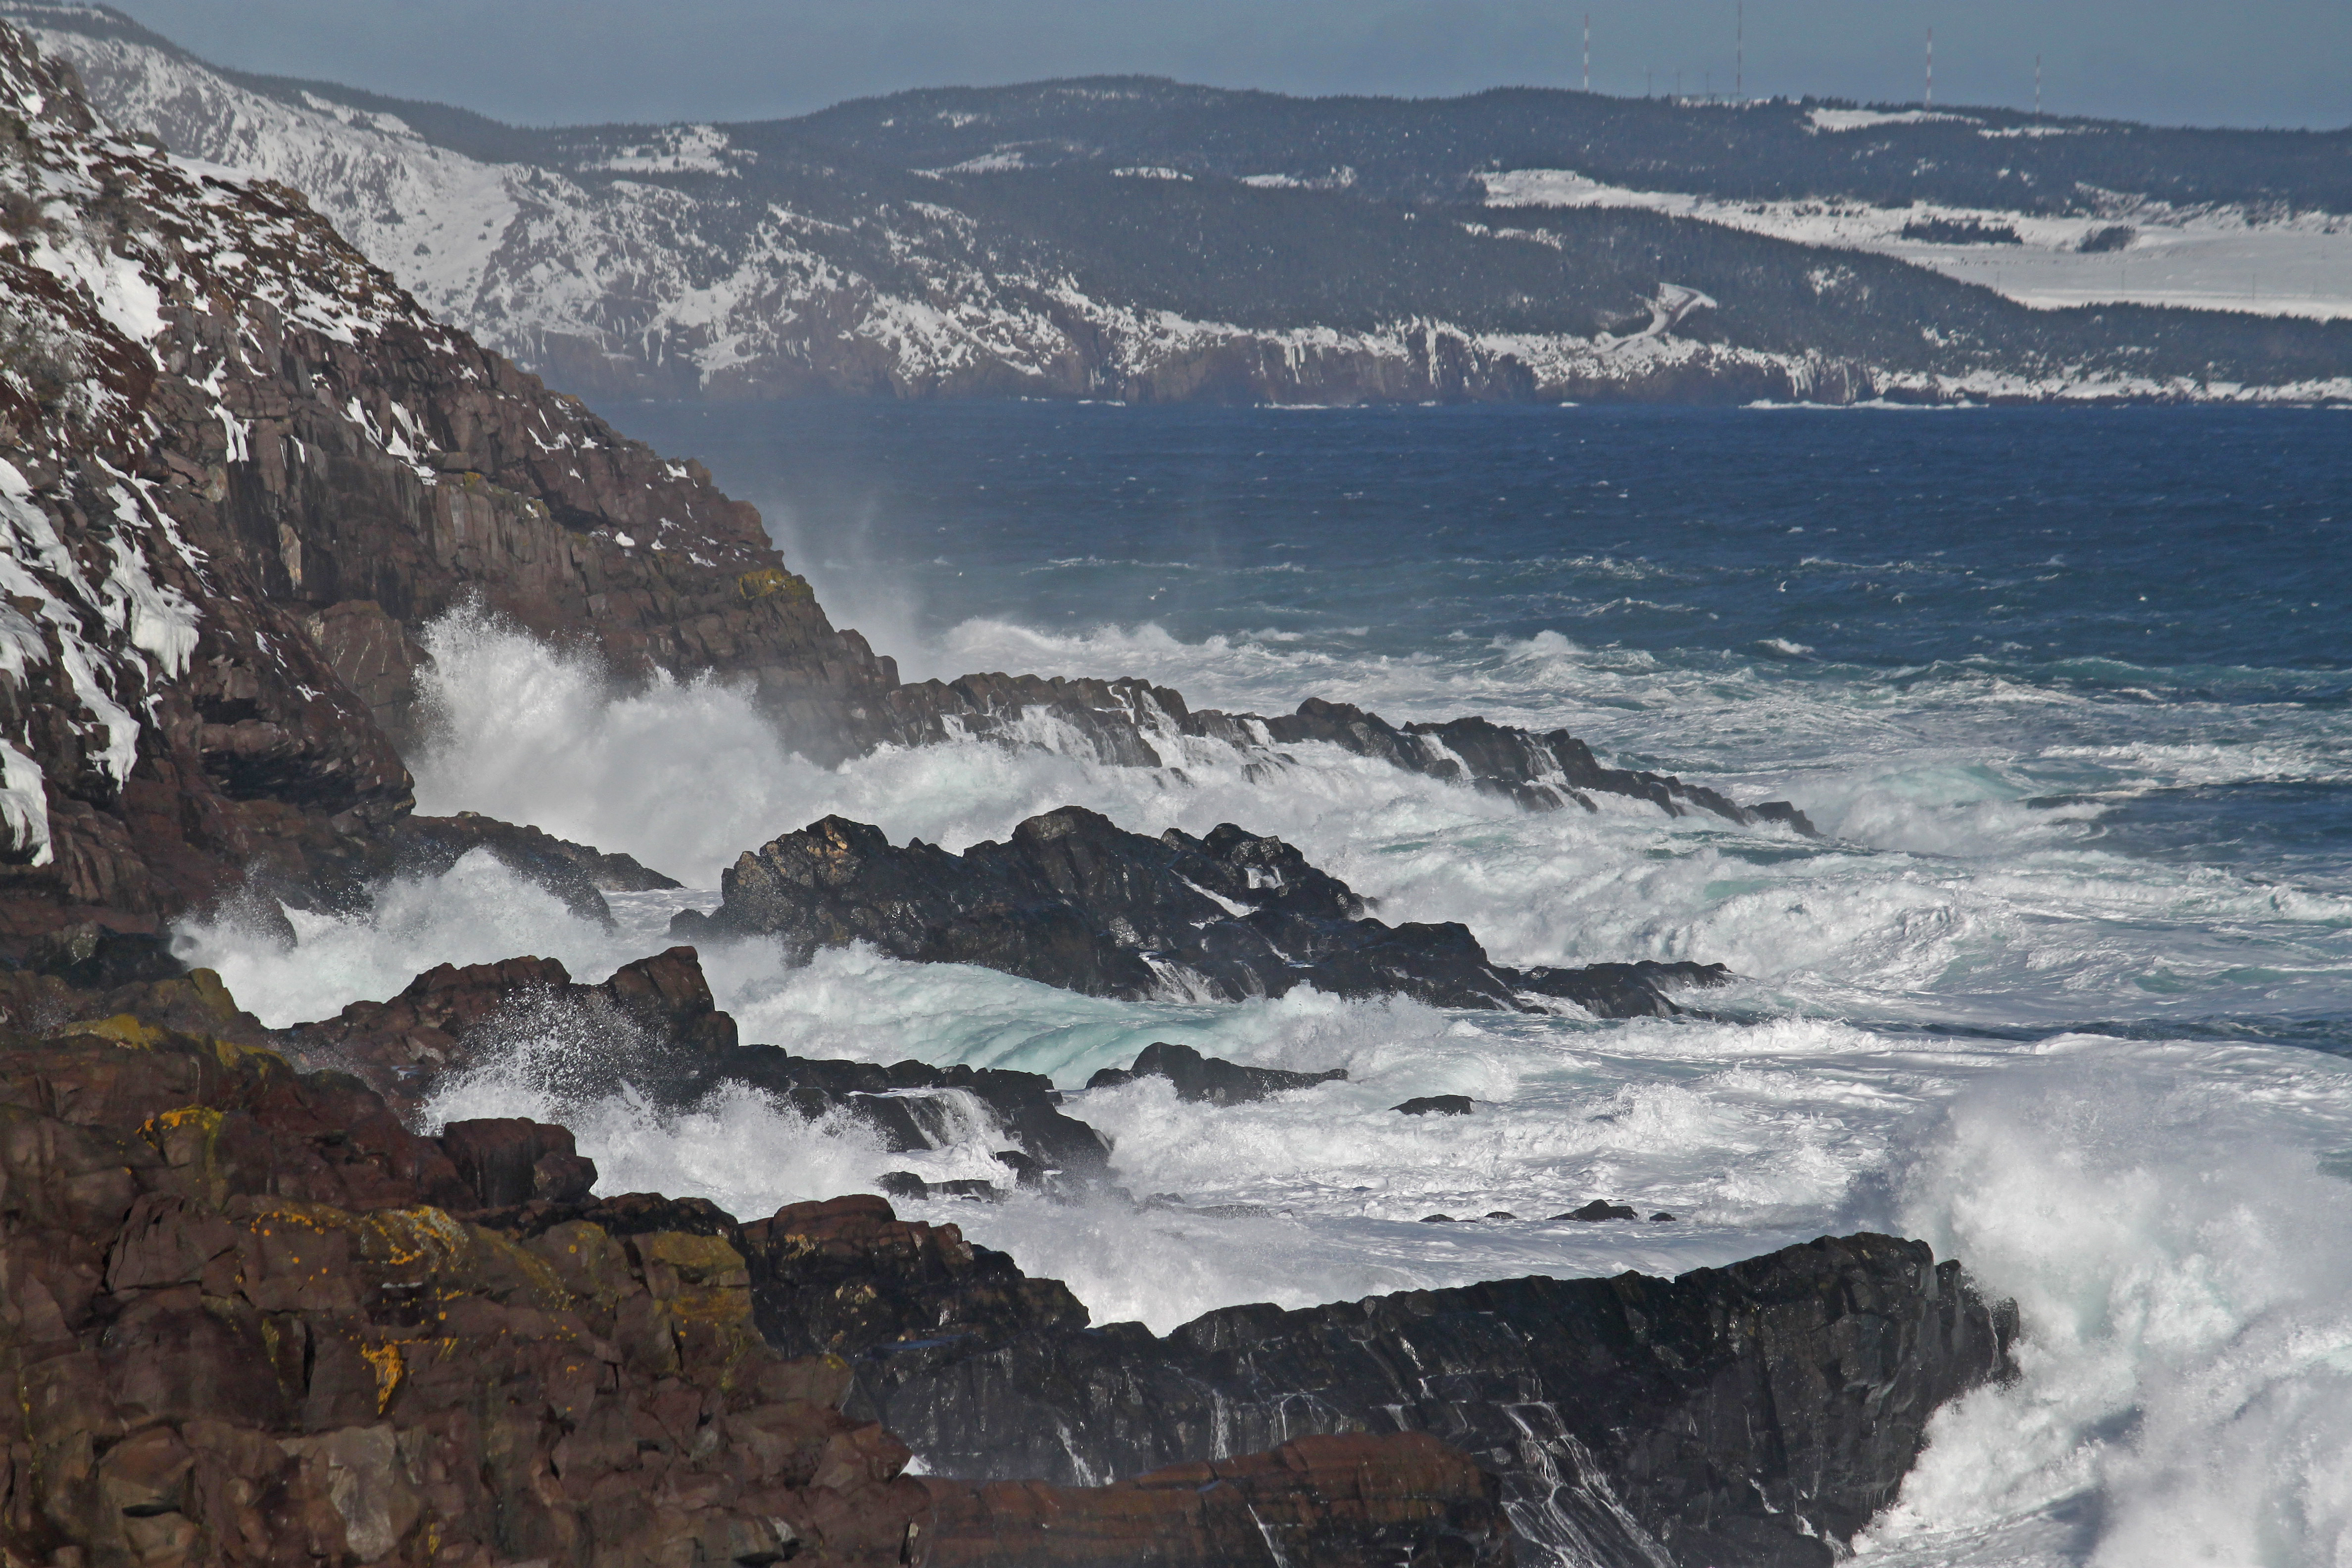 2011 - FEB 12 - 22 - NEWFOUNDLAND -059 Cape Spear after the storm (23c), Landscape, Mountain, Ocean, Outdoor, HQ Photo